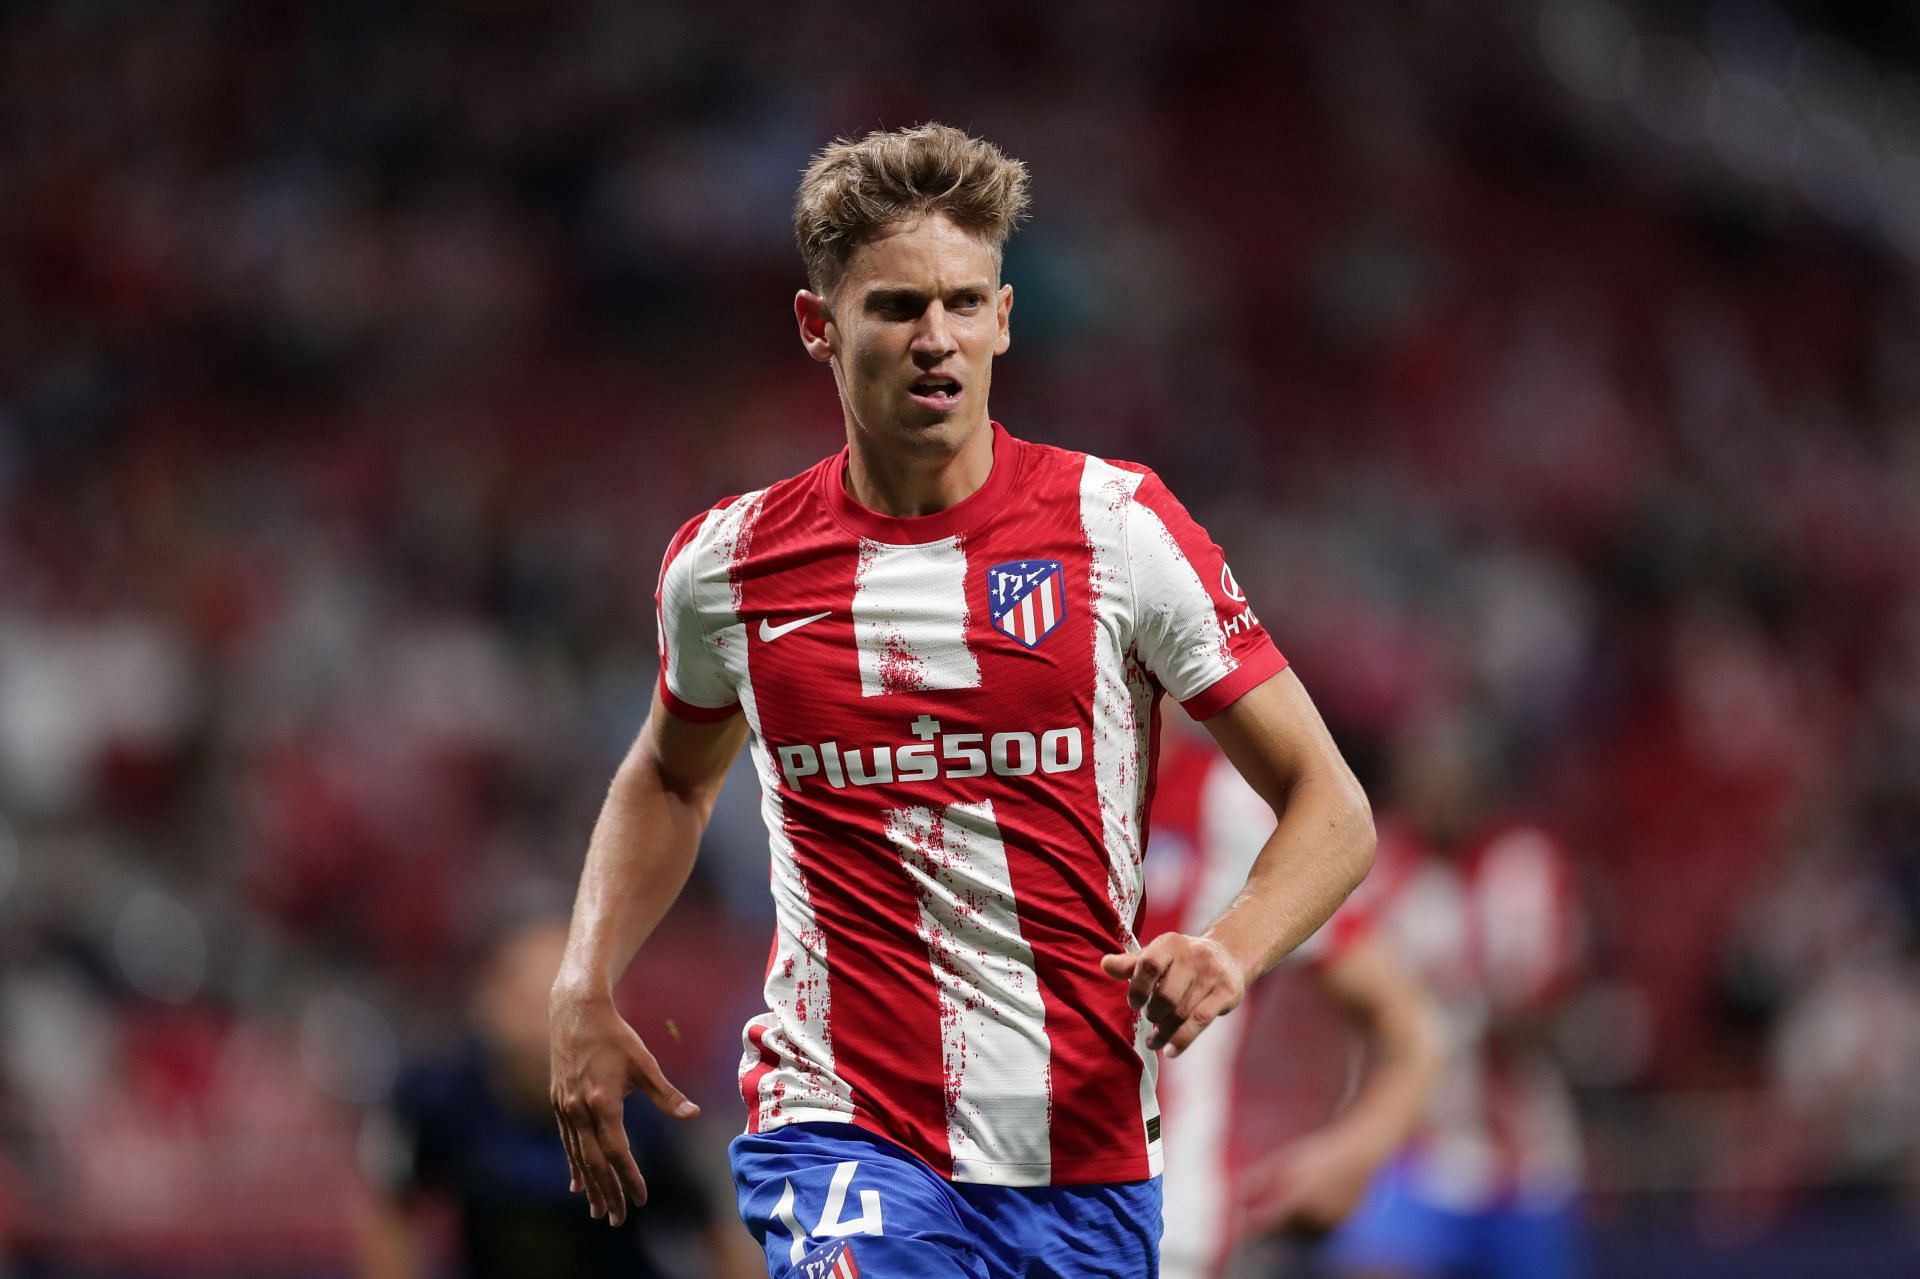 Marcus Llorente is one of the most valuable players at Atletico Madrid